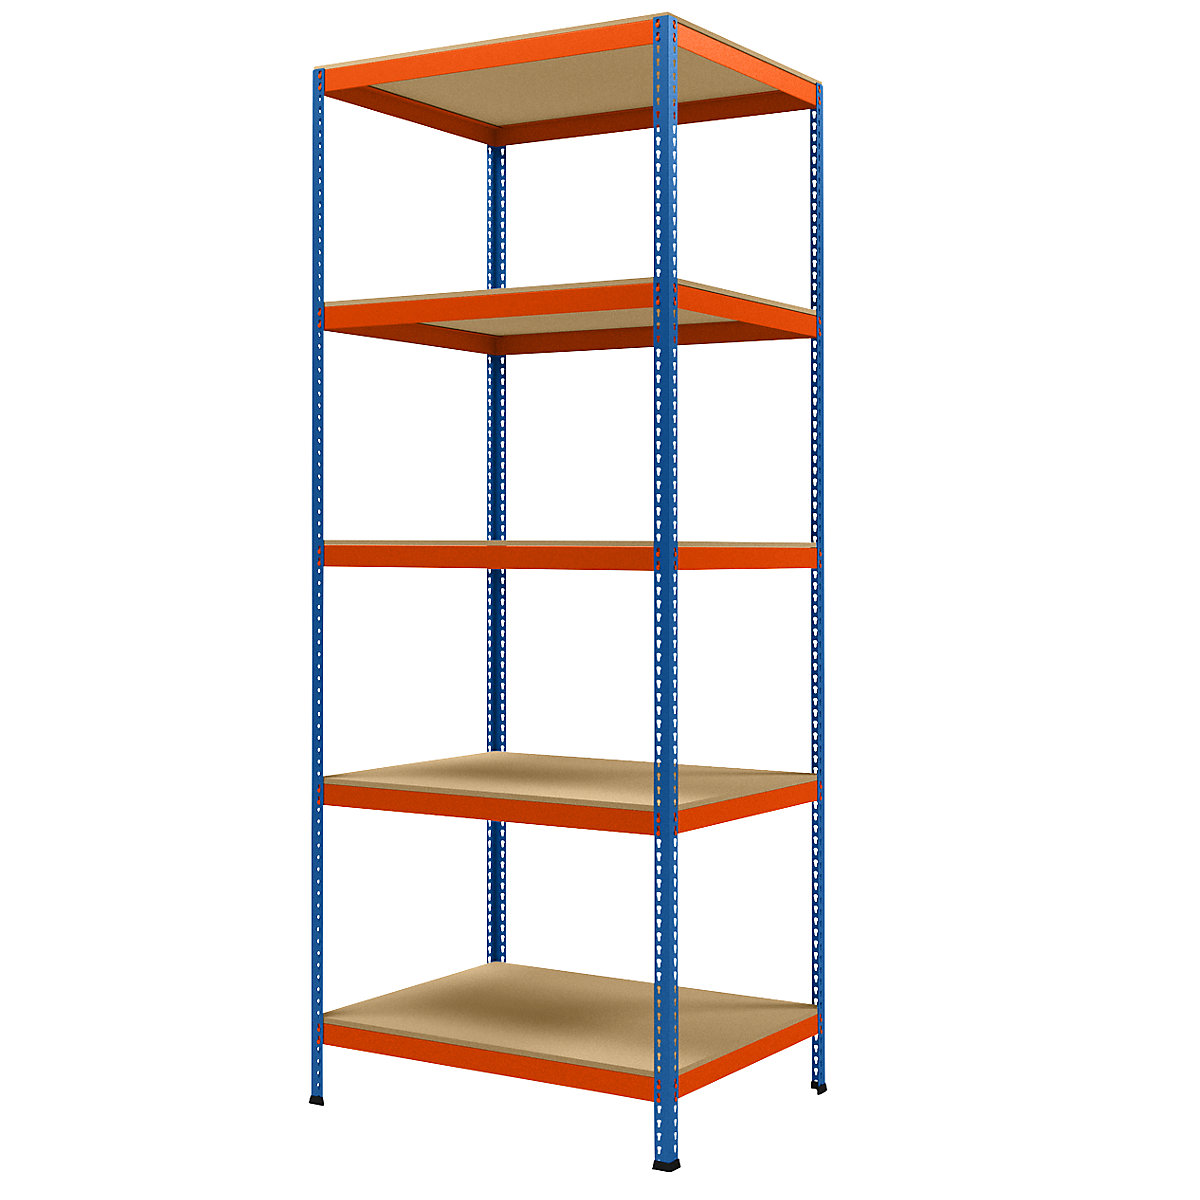 Wide span heavy duty shelving, height 3048 mm, overall depth 926 mm, width 1231 mm